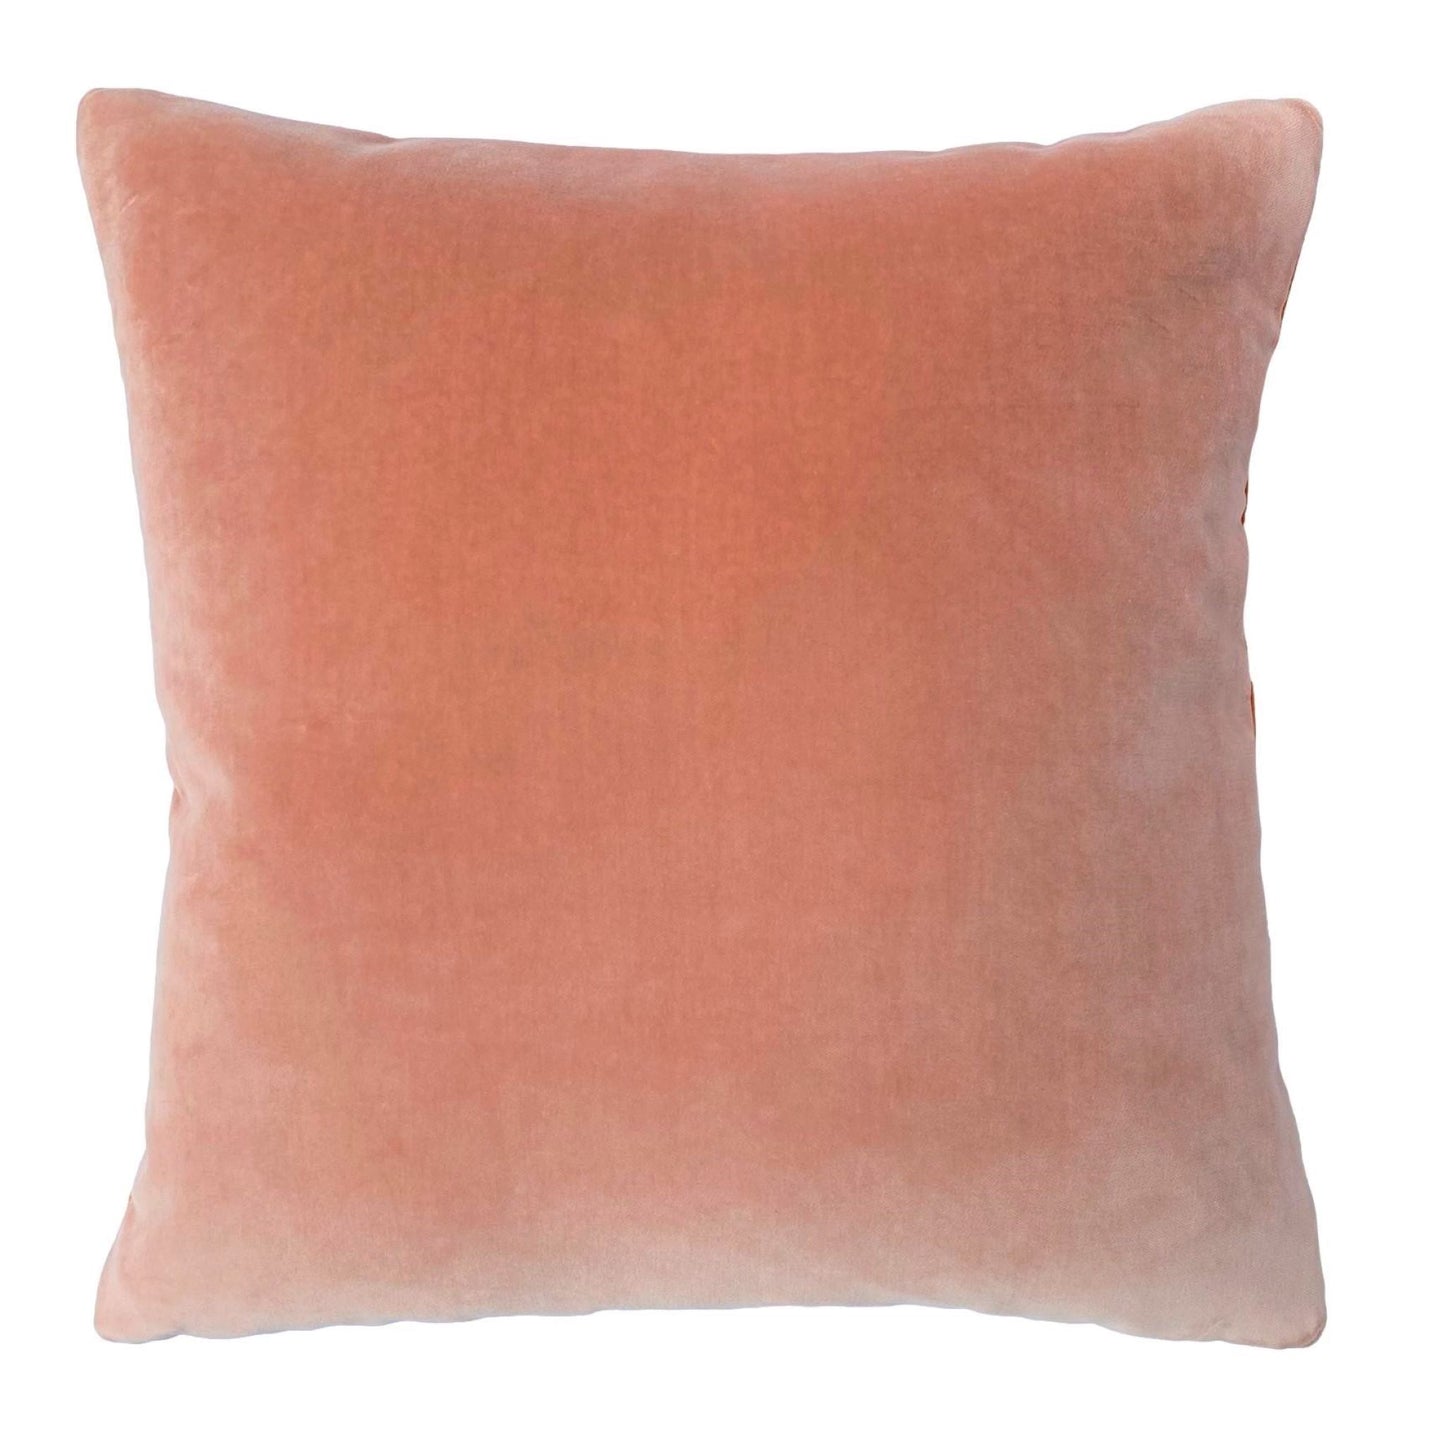 Bright Pink Velvet Cushion Cover with Blush Pink